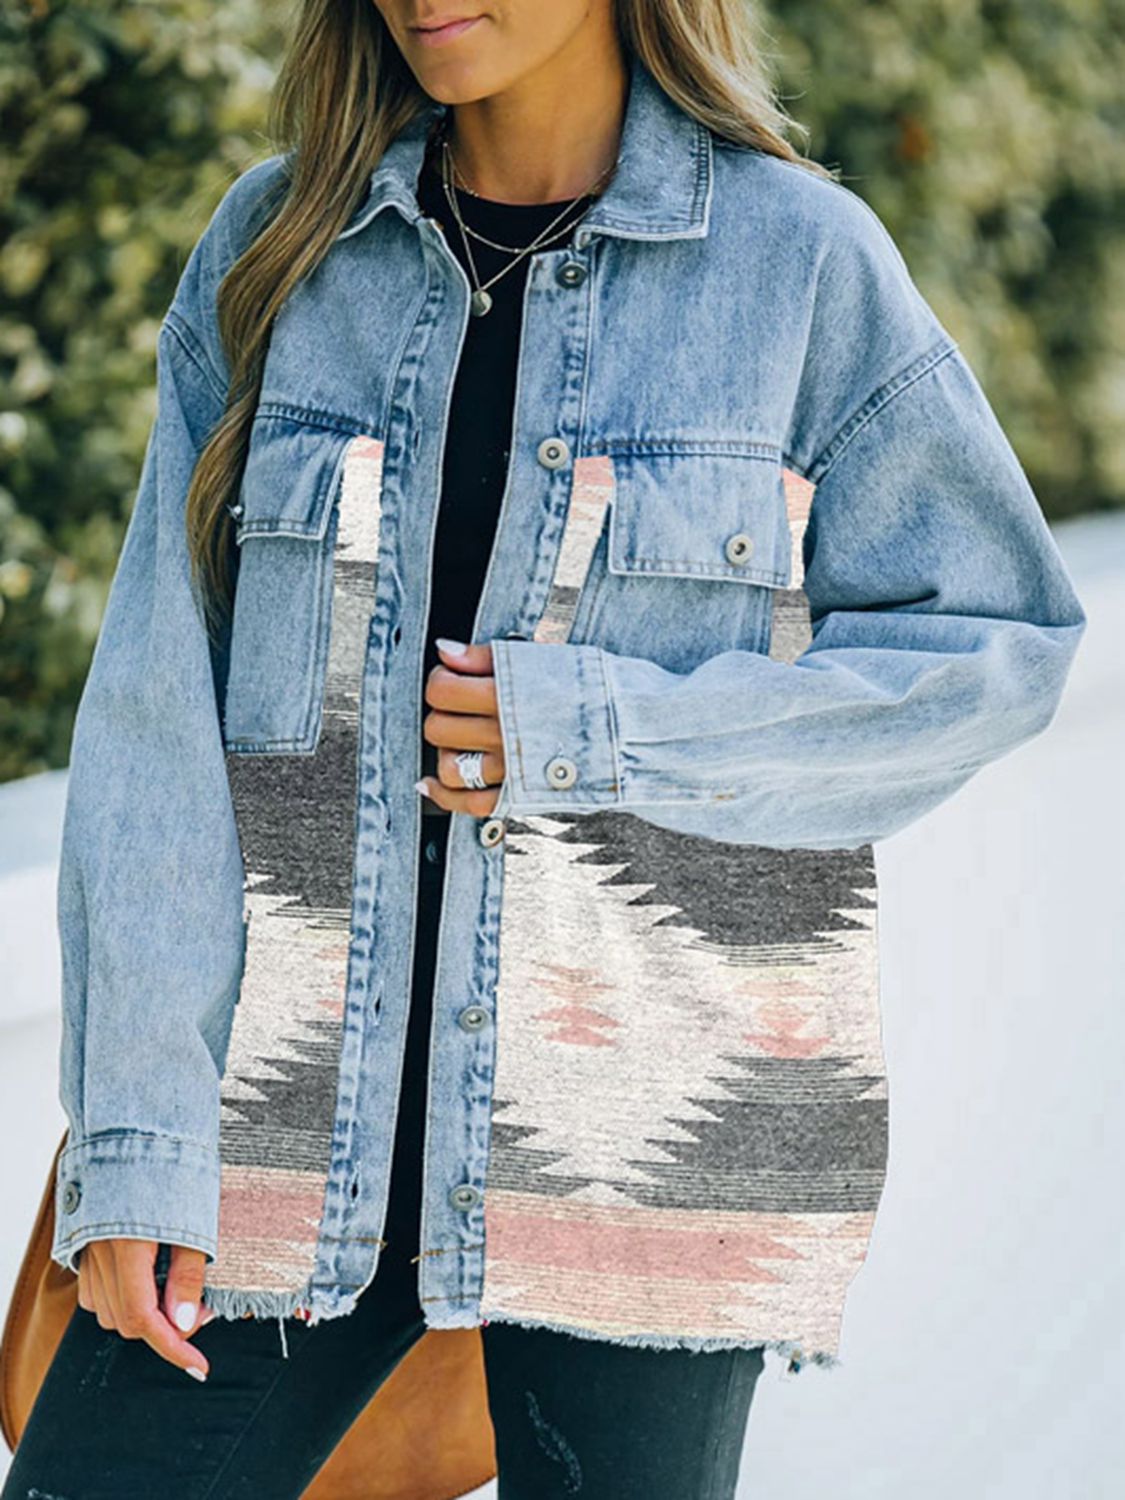 South West Collared Neck Dropped Shoulder Denim Jacket - Coco and lulu boutique 